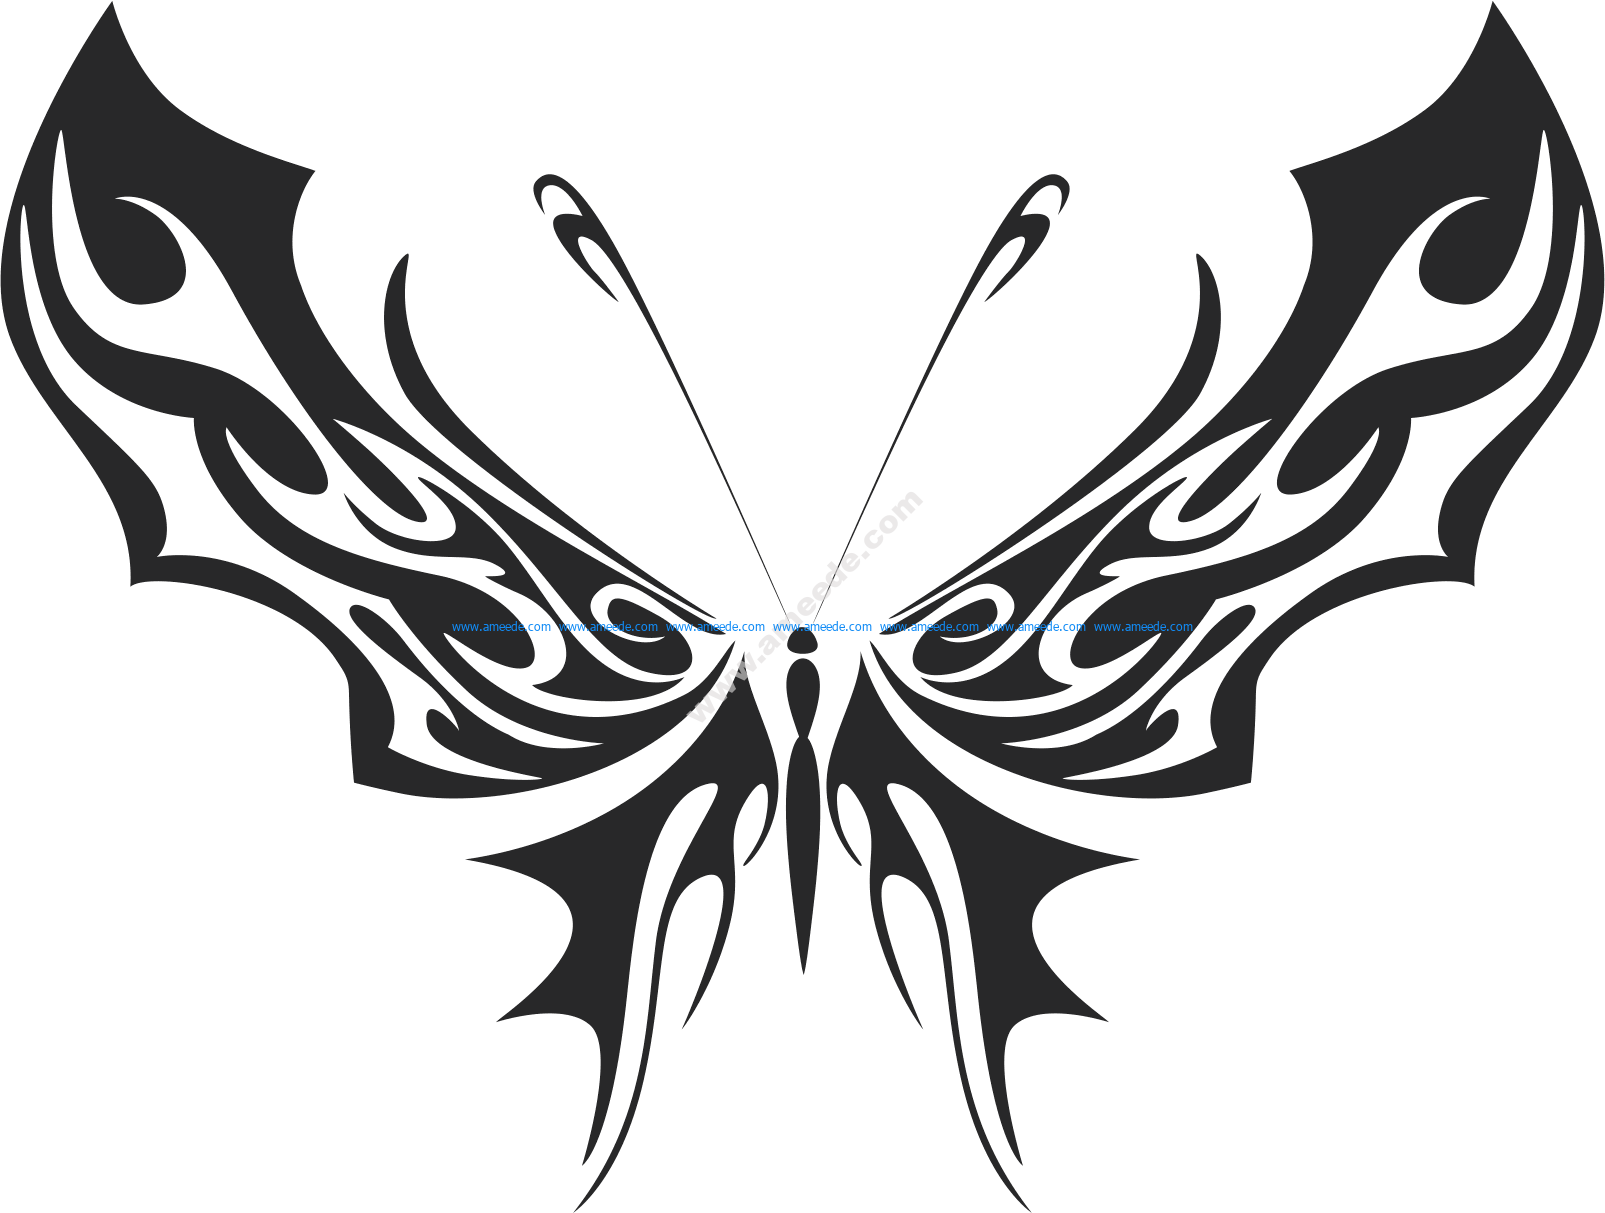 Download Tribal Butterfly Vector Art 35 - Download Free Vector